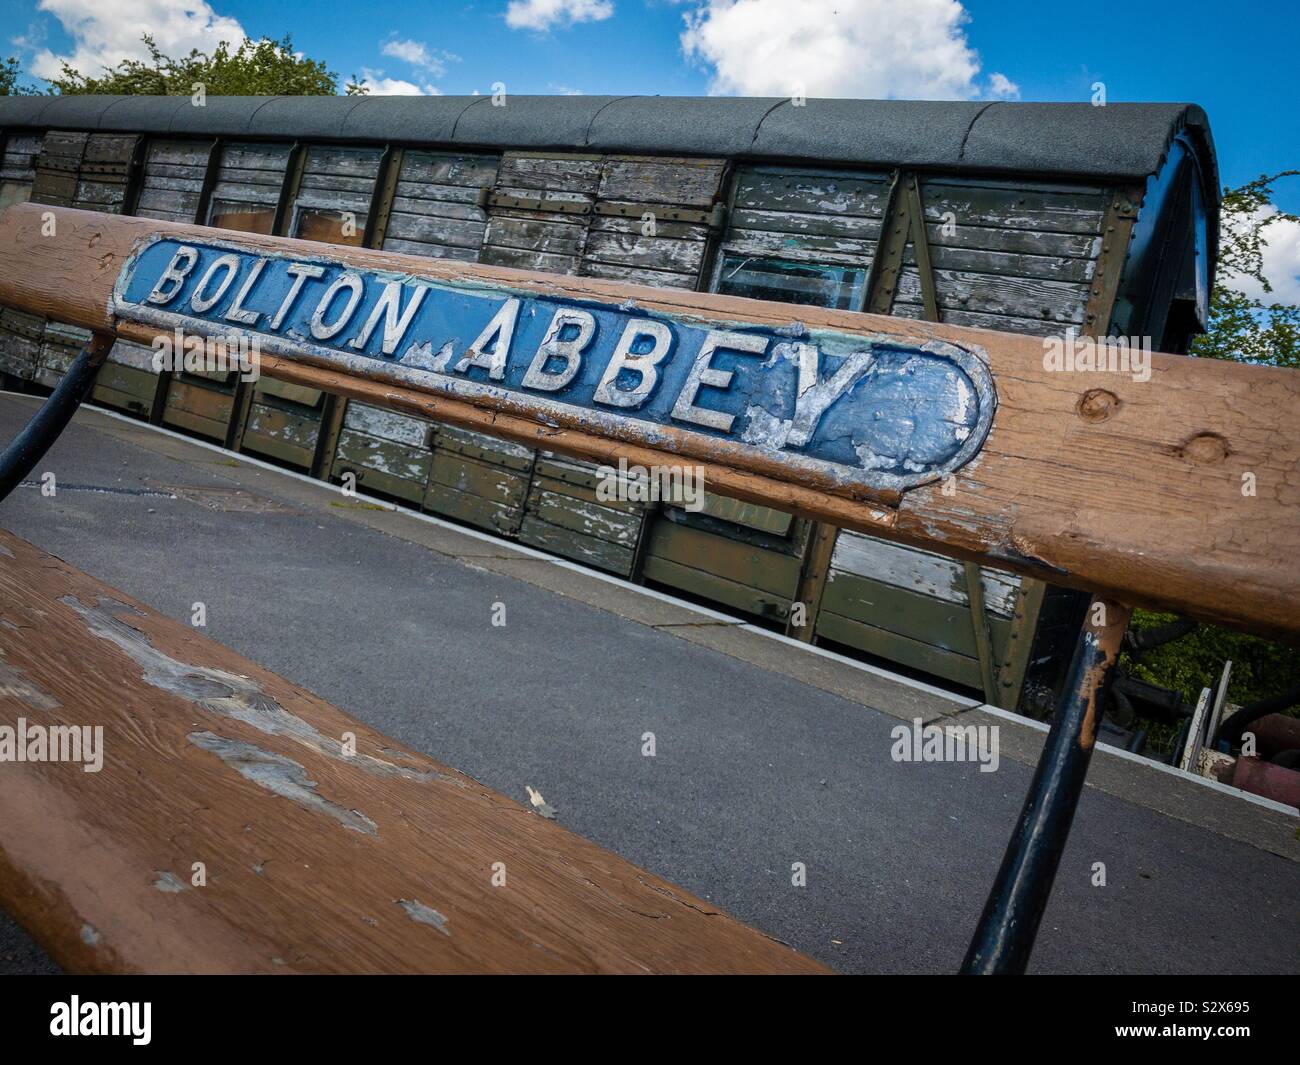 Bolton Abbey sign on bench at railway station in Yorkshire Stock Photo